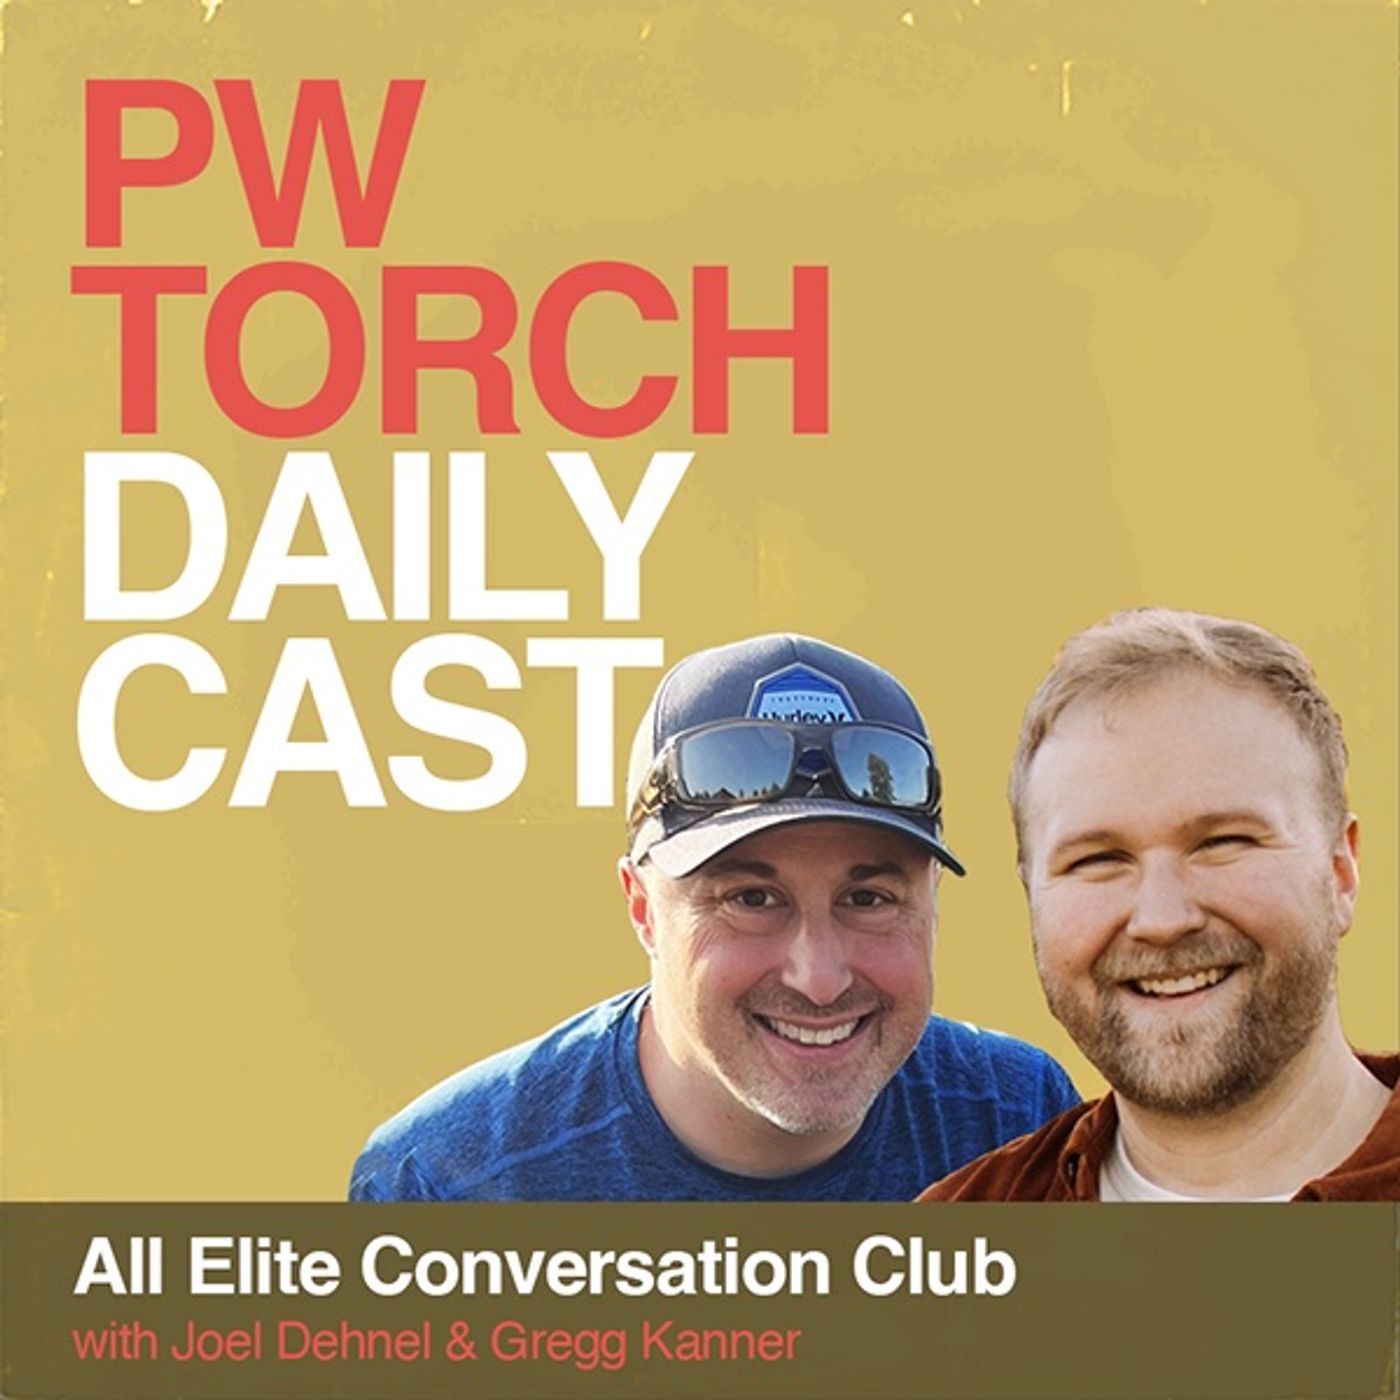 All Elite Conversation Club - Dehnel & Kanner discuss the continued Elite takeover of Dynamite, Kenny Omega’s impending surgery and return